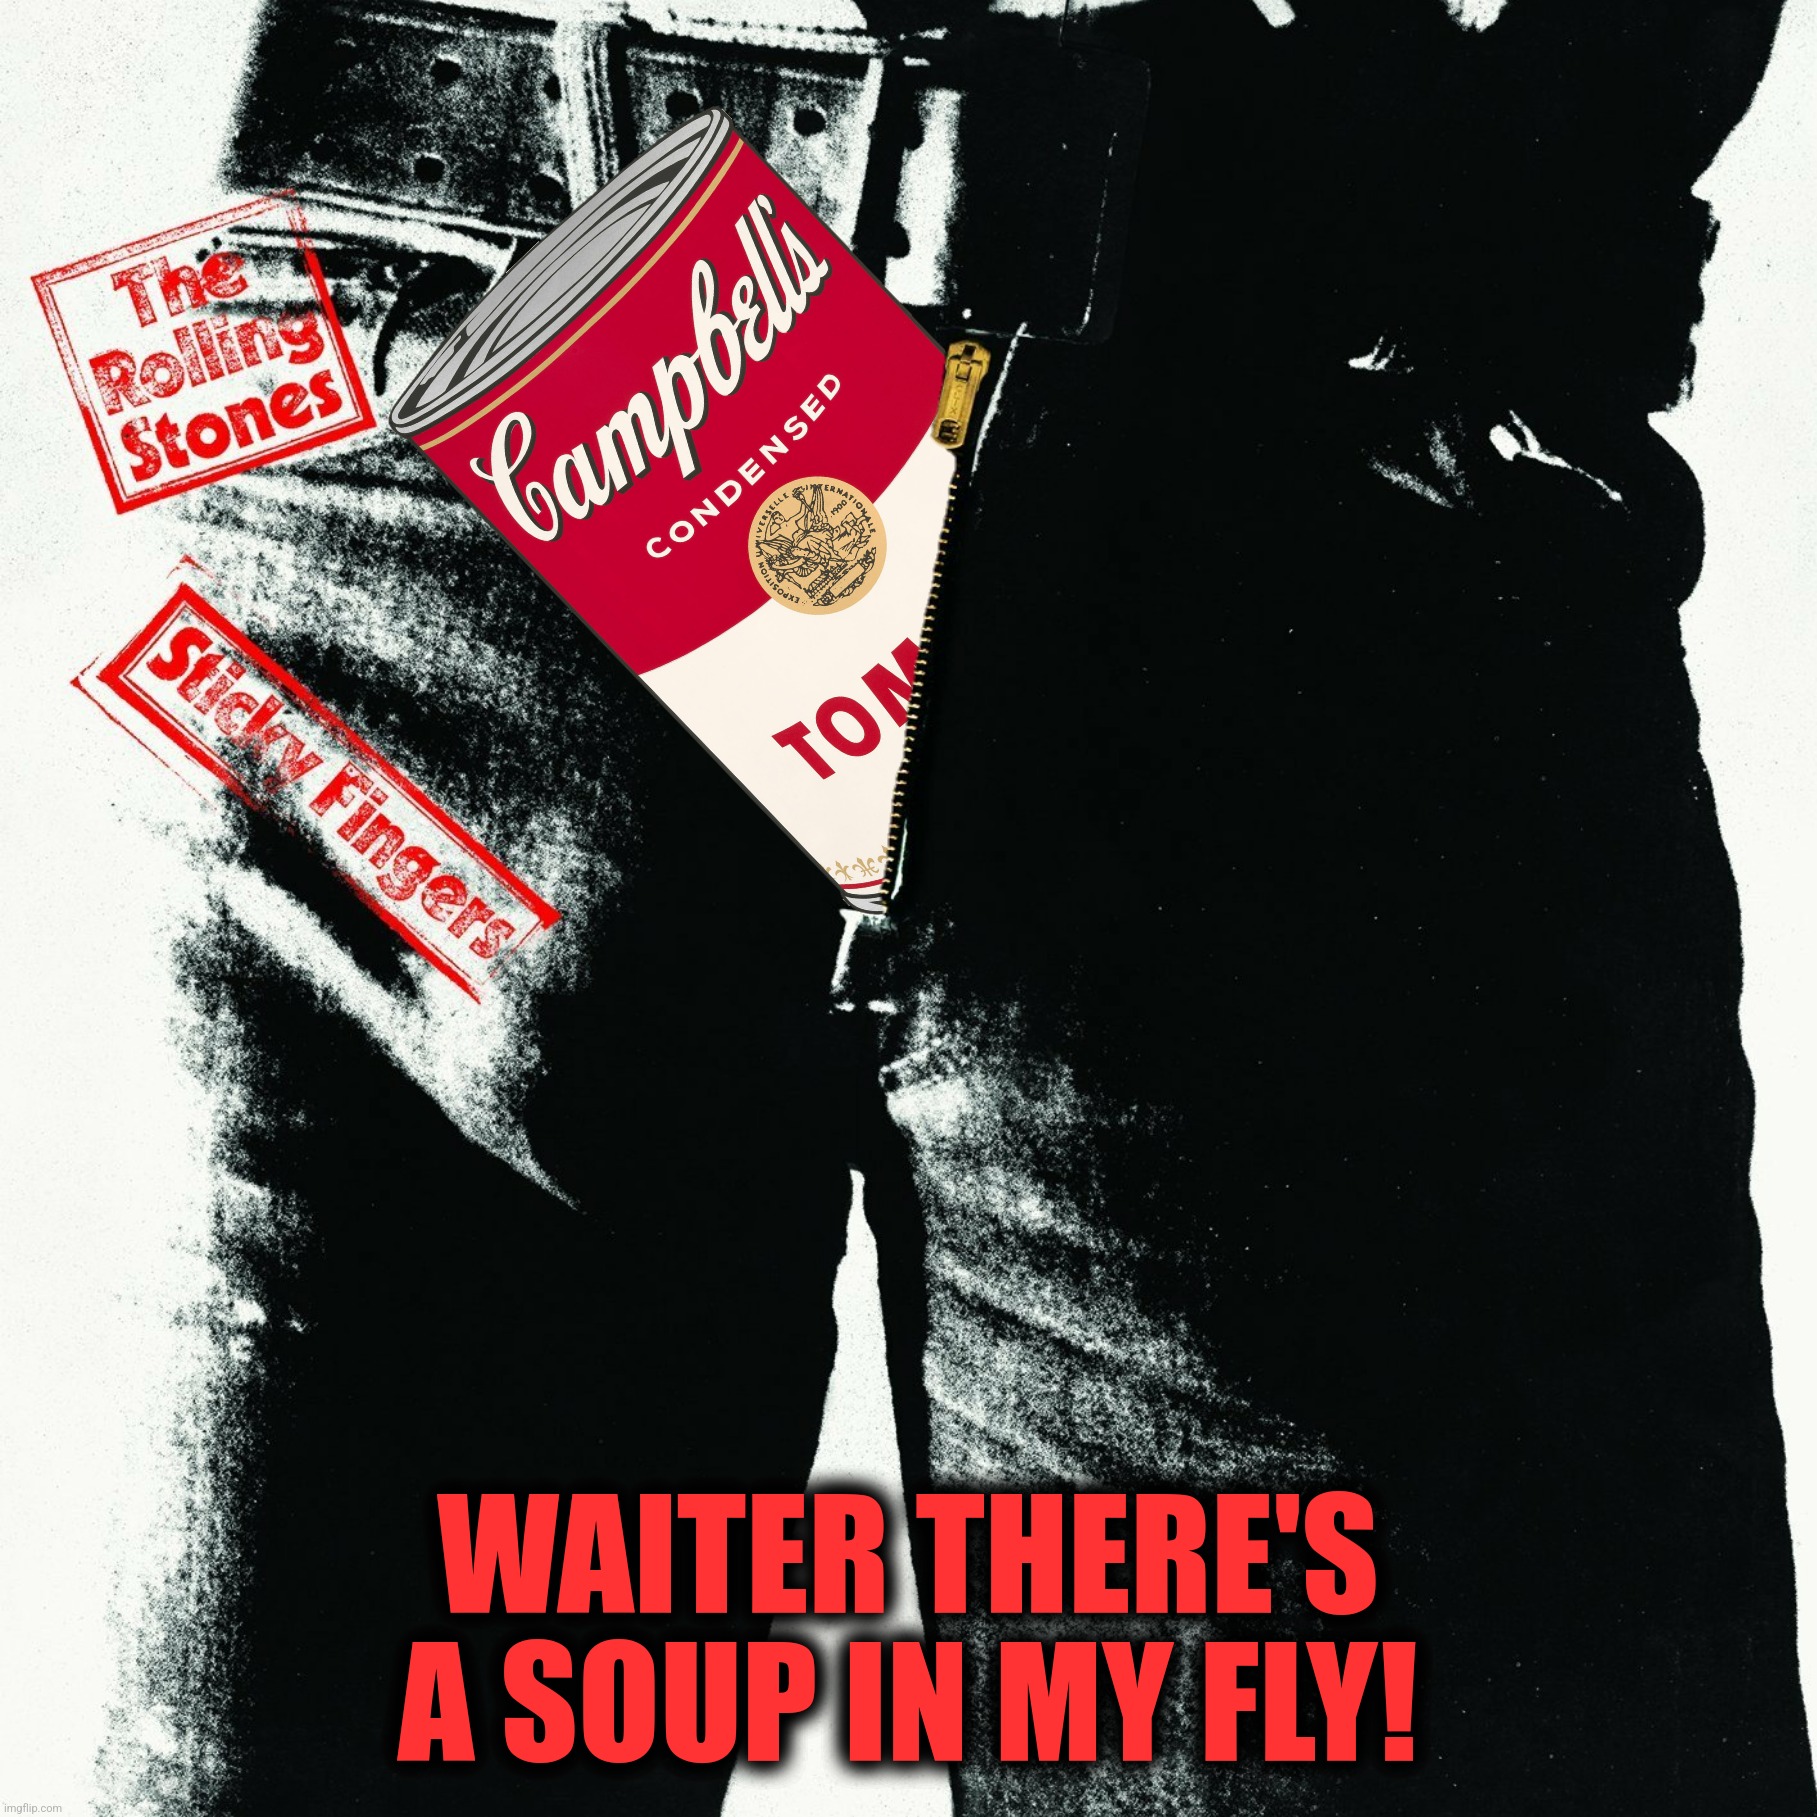 WAITER THERE'S A SOUP IN MY FLY! | made w/ Imgflip meme maker